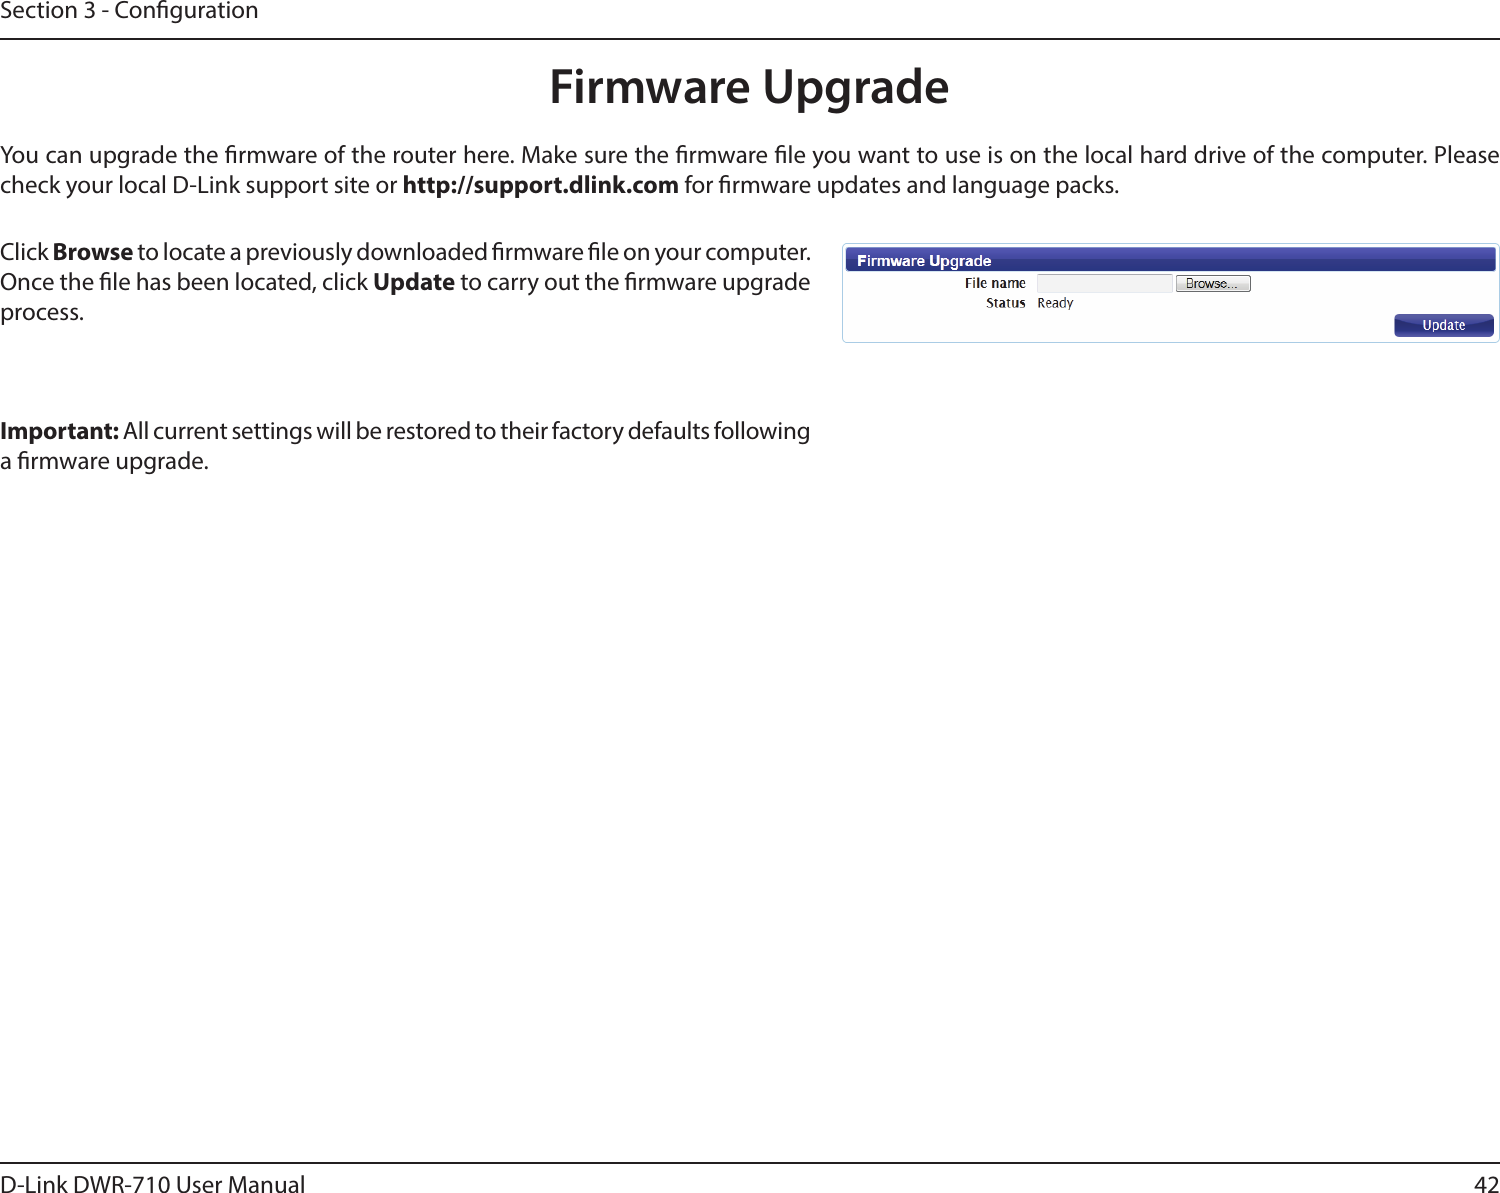 42D-Link DWR-710 User ManualSection 3 - CongurationFirmware UpgradeClick Browse to locate a previously downloaded rmware le on your computer. Once the le has been located, click Update to carry out the rmware upgrade process.Important: All current settings will be restored to their factory defaults following a rmware upgrade. You can upgrade the rmware of the router here. Make sure the rmware le you want to use is on the local hard drive of the computer. Please check your local D-Link support site or http://support.dlink.com for rmware updates and language packs.